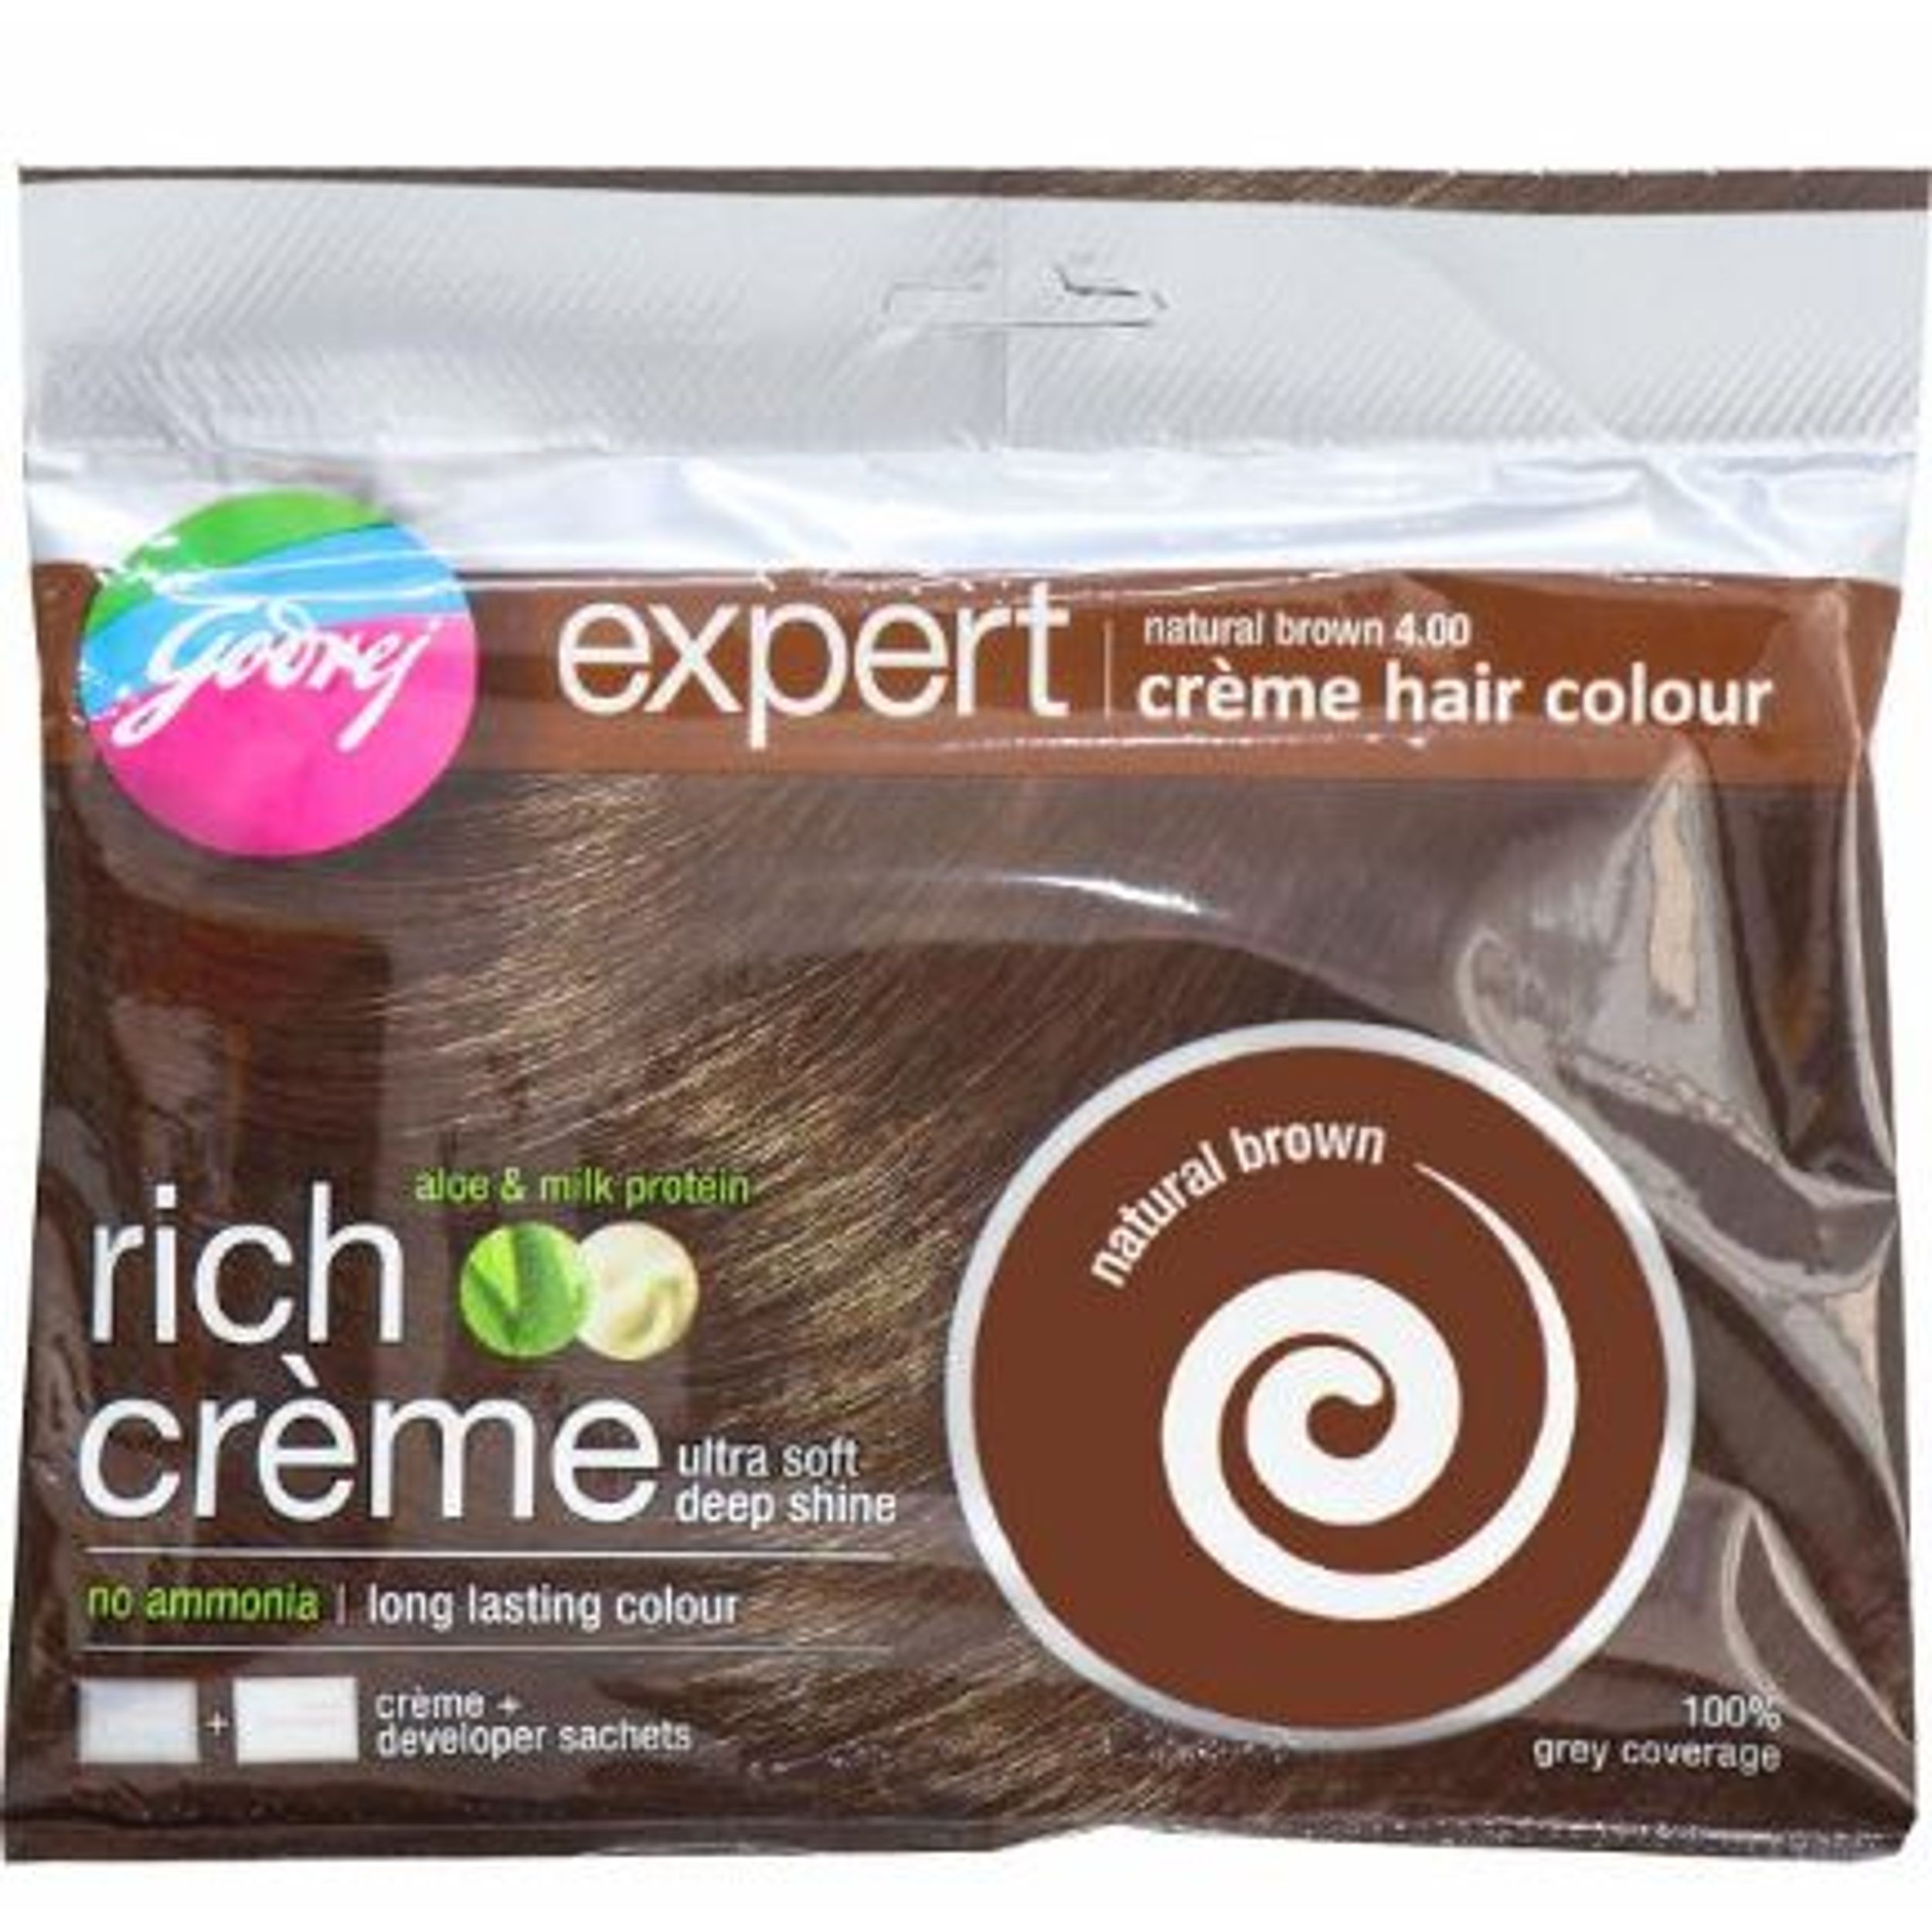 Godrej Expert Rich Creme Natural Brown 40 Hair Colour 1 Kit Price Uses  Side Effects Composition  Apollo Pharmacy